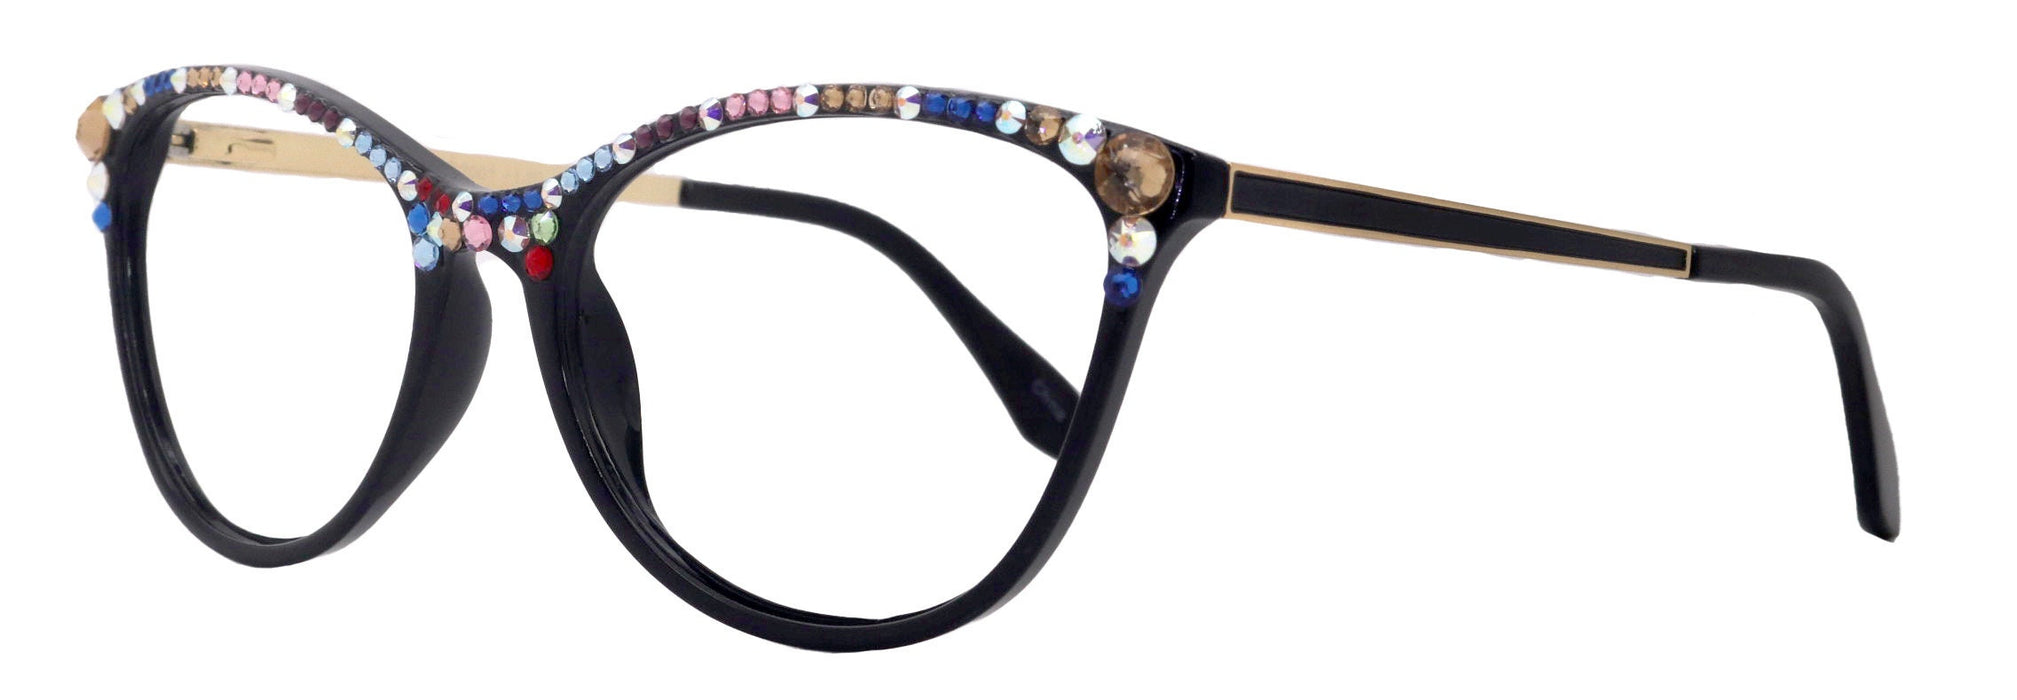 Cattitude Bling Reading Glasses 4 Women W Multi Color Genuine European Crystals, Magnifying Cat Eye NY Fifth Avenue